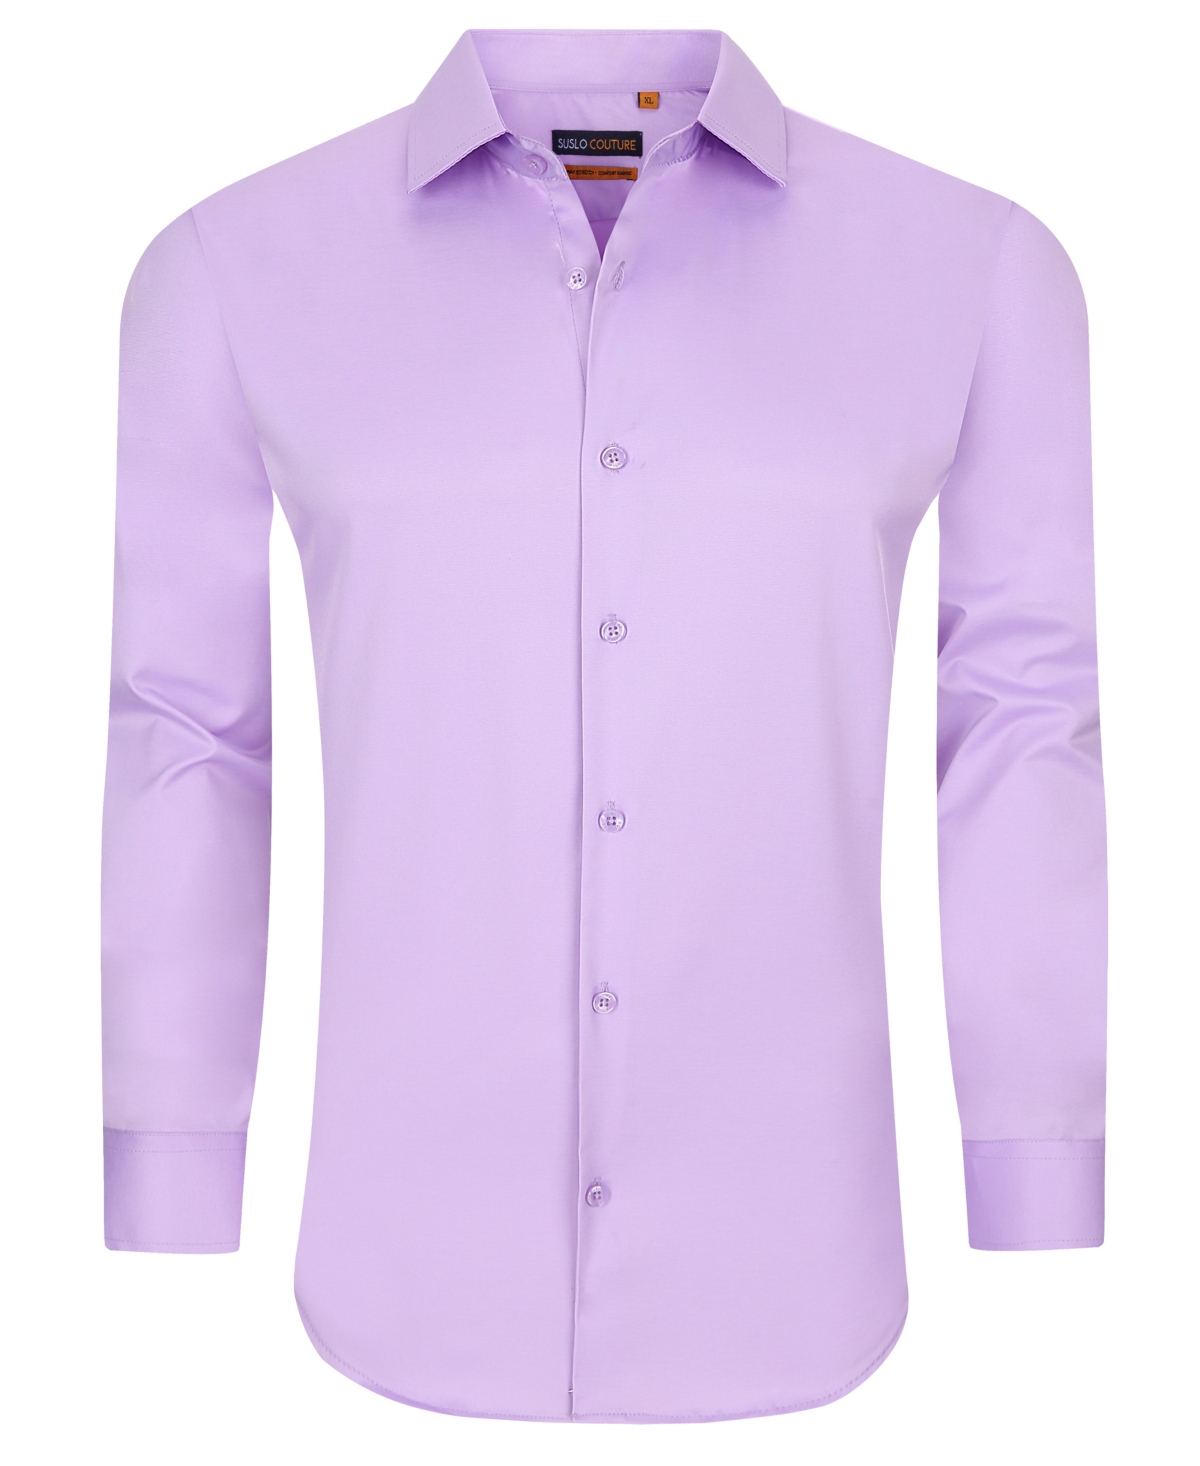 Men's Solid Slim Fit Wrinkle Free Stretch Long Sleeve Button Down Shirt - Light Purple